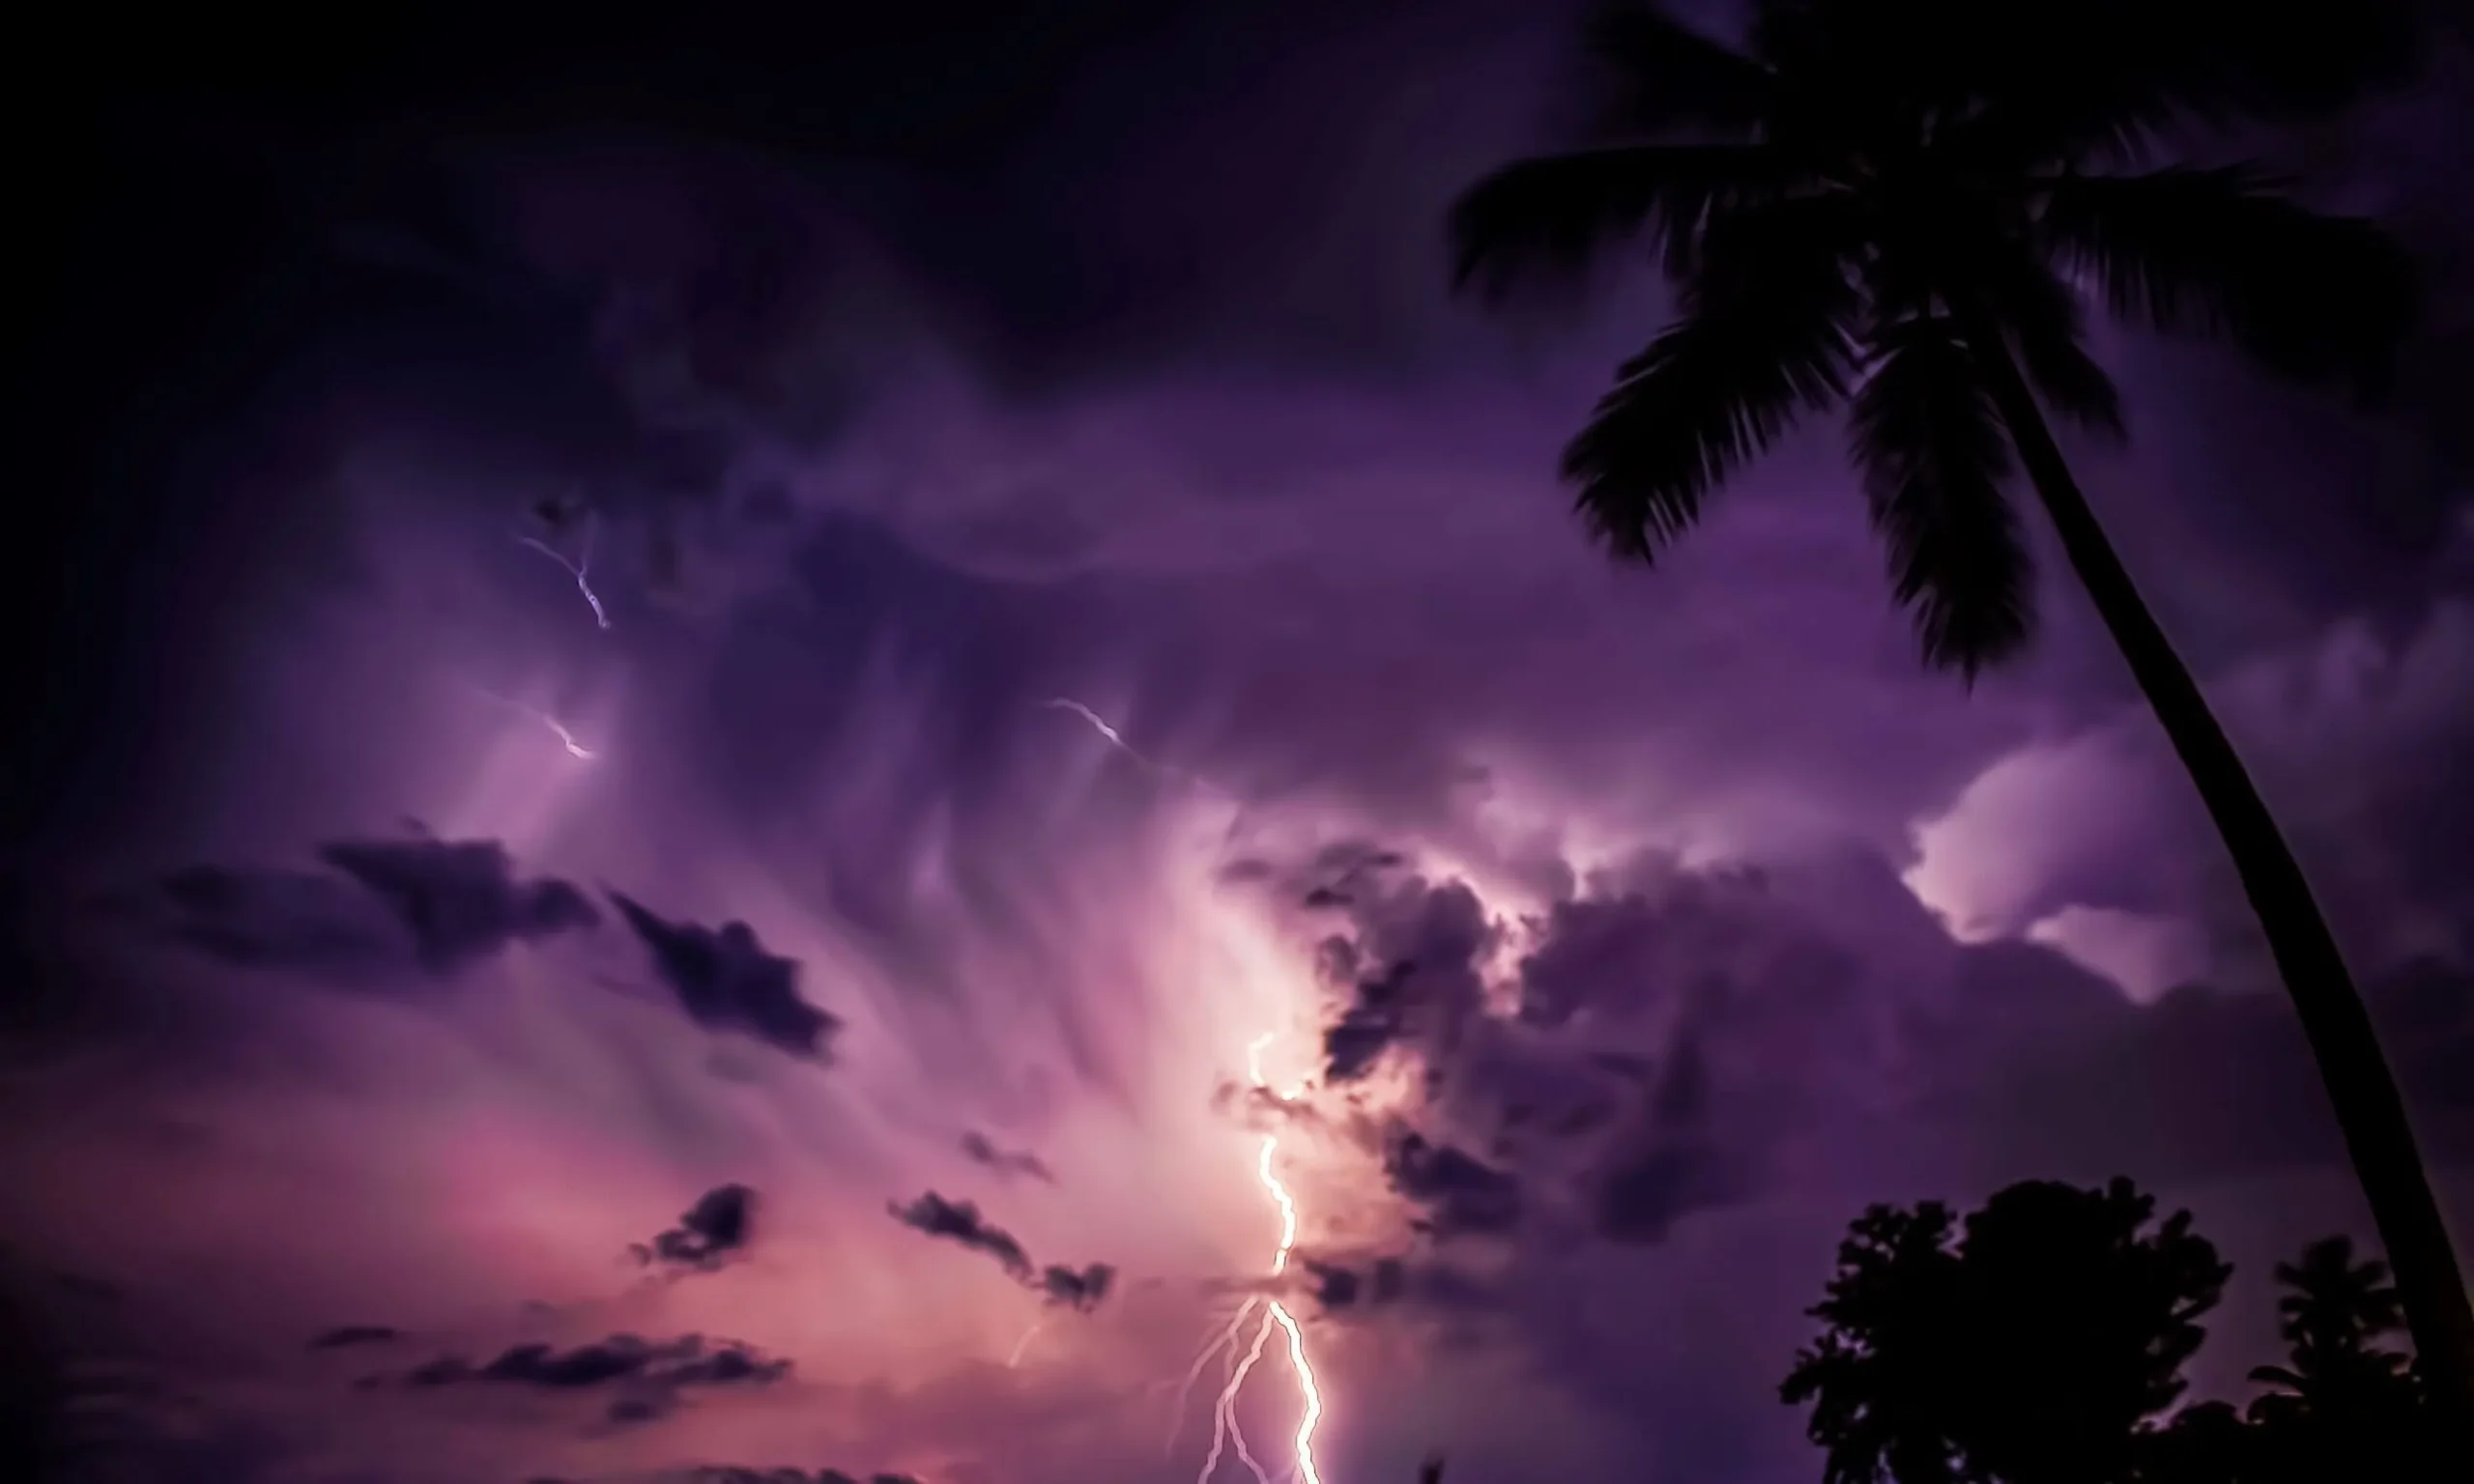 A night time shot of a palm tree blowing in the wind and lightning striking in the background.